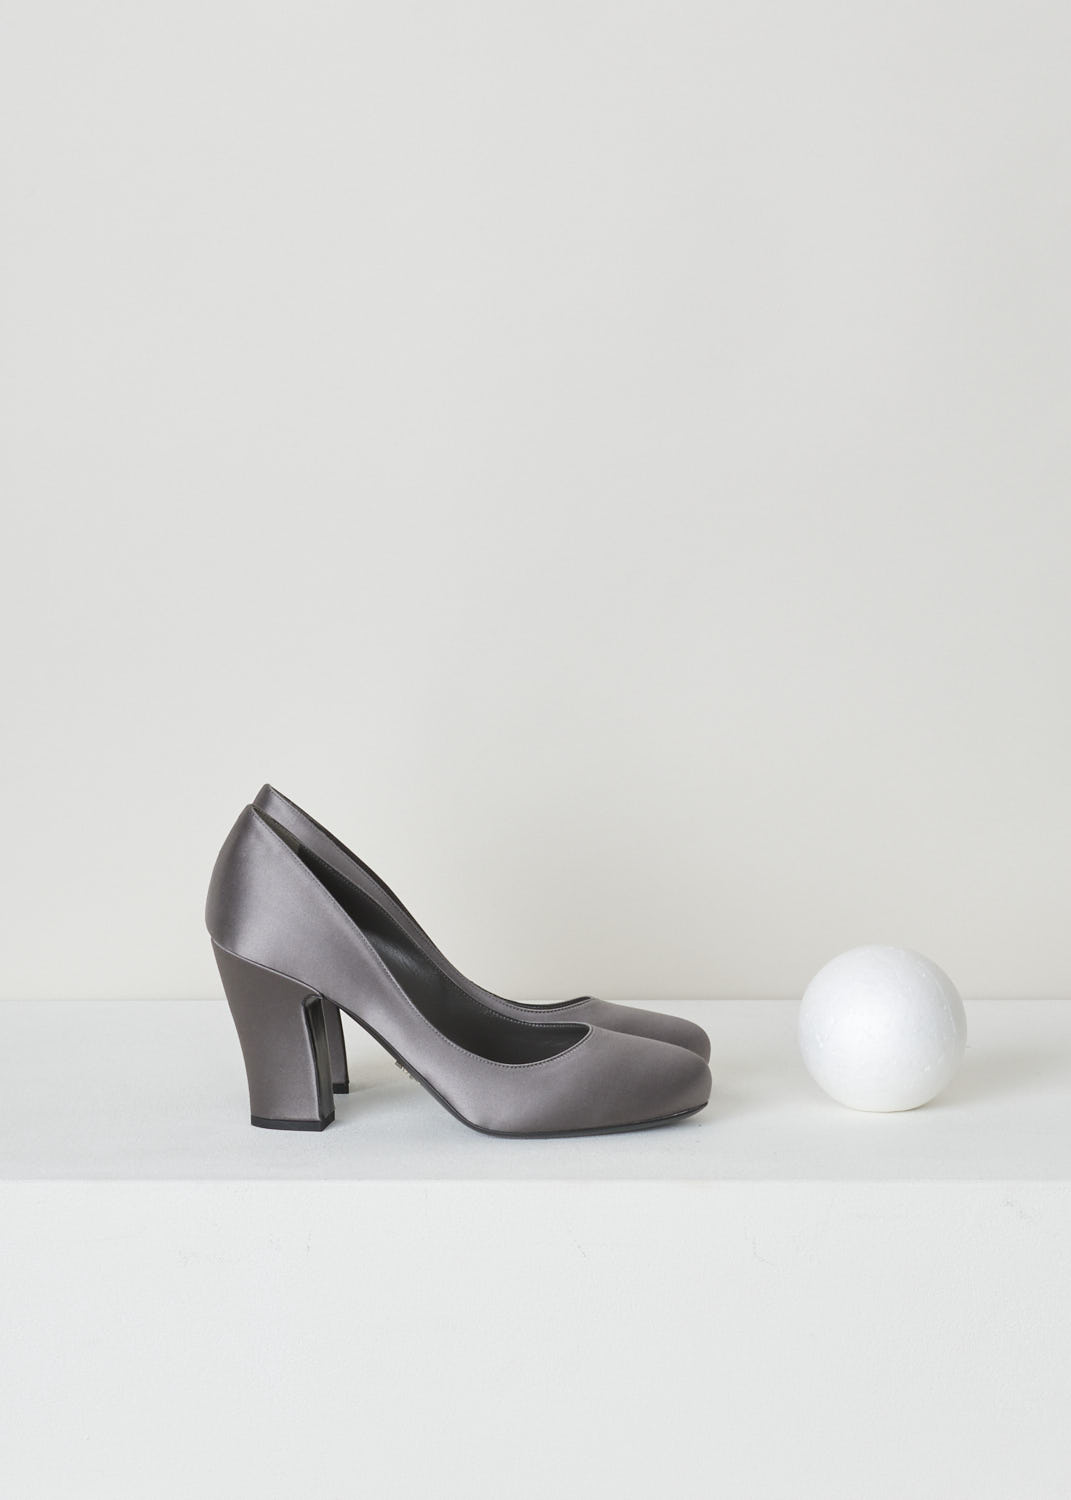 PRADA, GREY SATIN PUMP, 1I840L_RASO_F0480_ARDESIA, Grey, Silver, Side, Classic grey pumps with a satin look. This model features a rounded toe box and a sturdy block heel.

Heel height: 8 cm / 3.14 inch.
